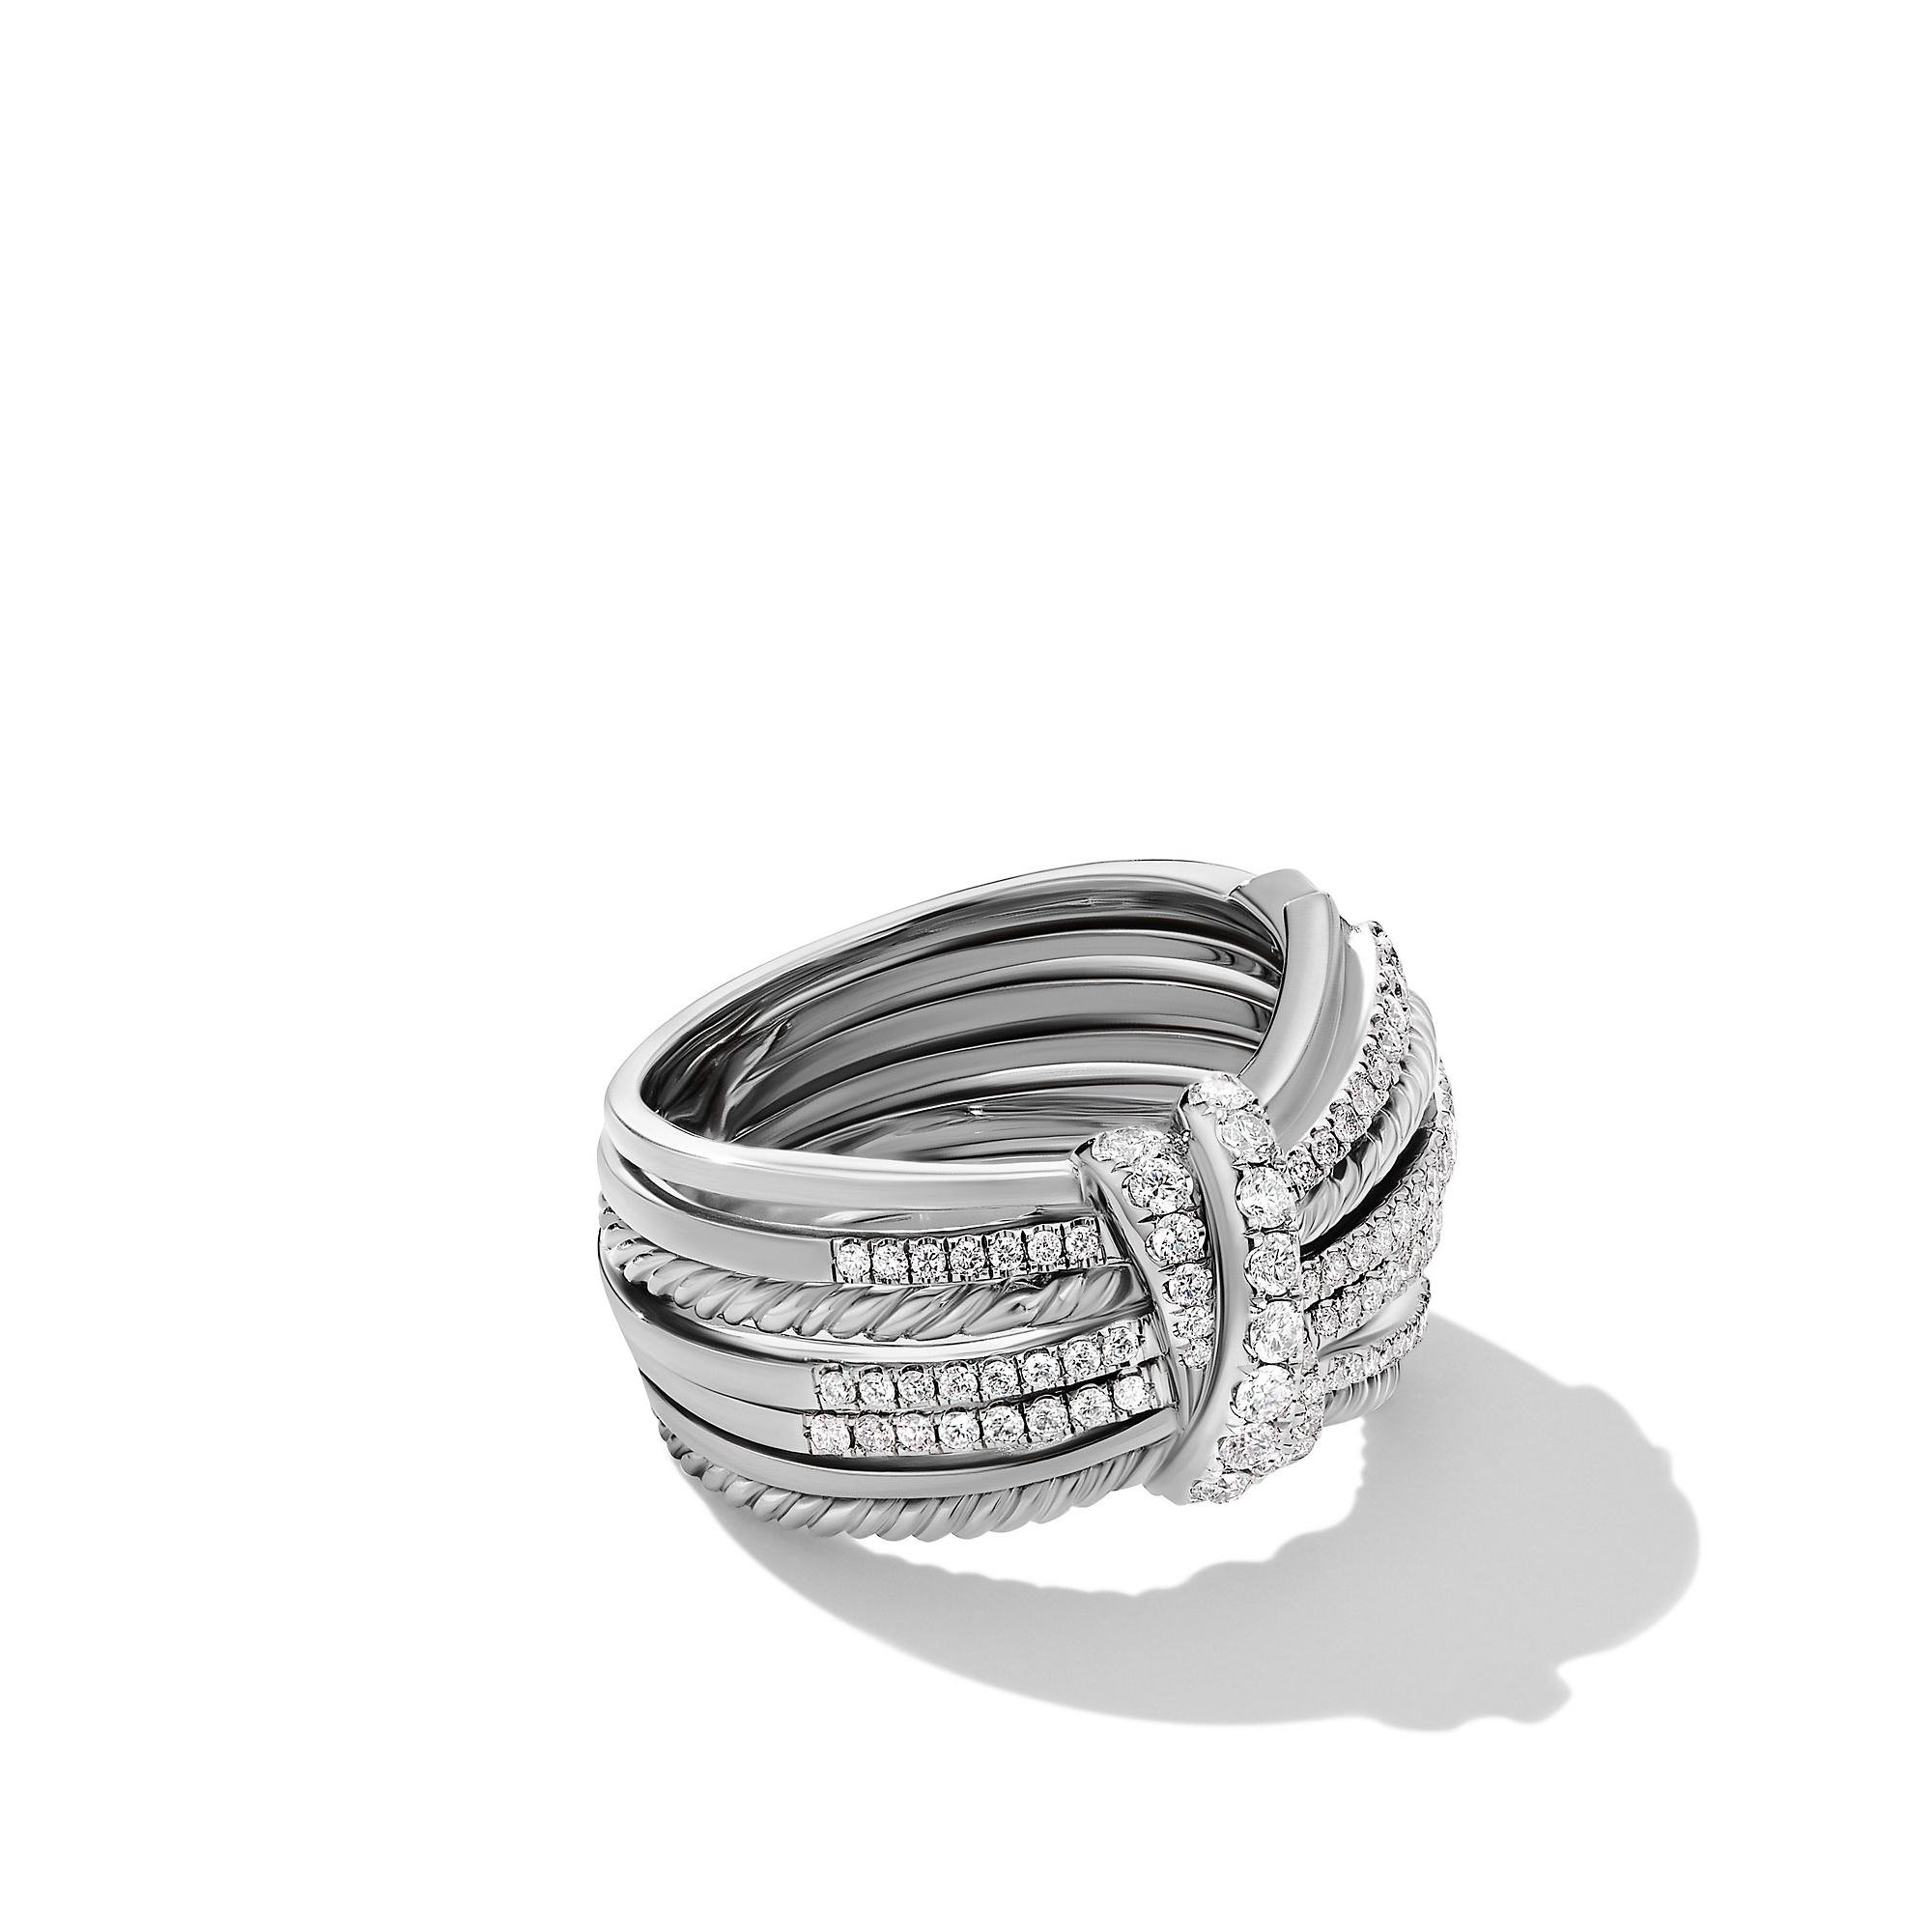 David Yurman 15mm Angelika Ring in Sterling Silver with Pave Diamonds, size 8